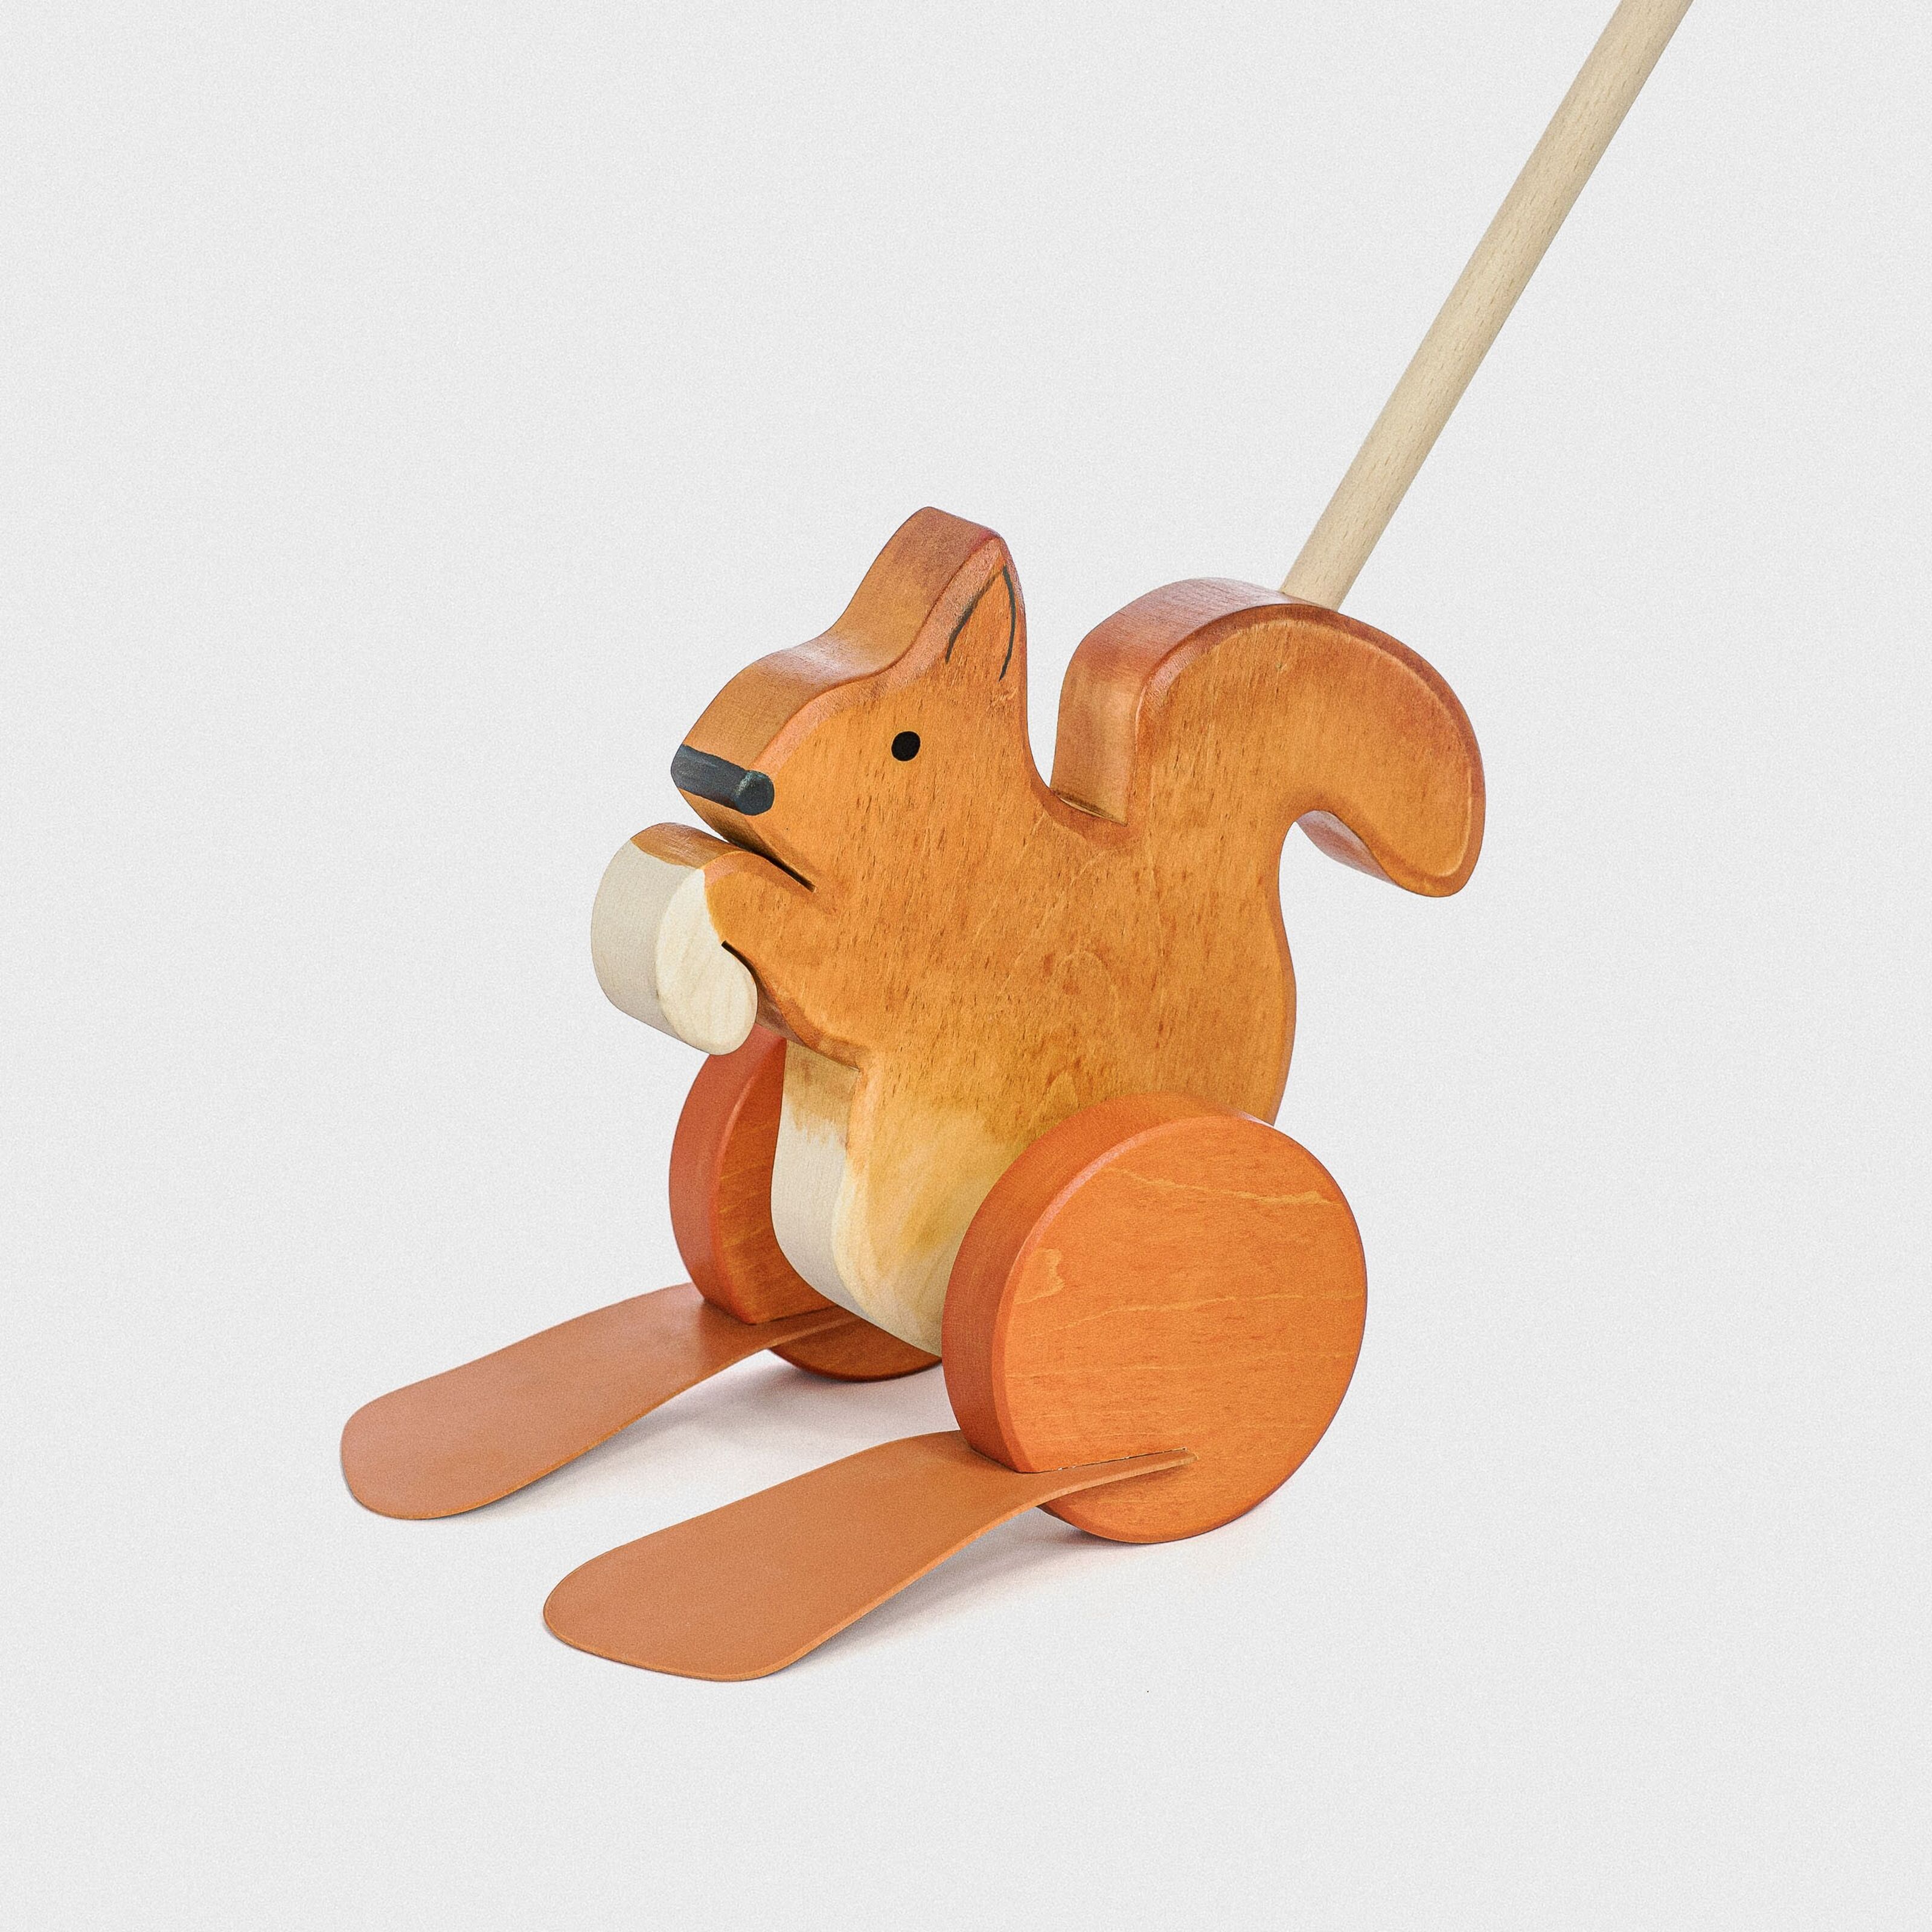 Whole Wooden Push Toy Squirrel